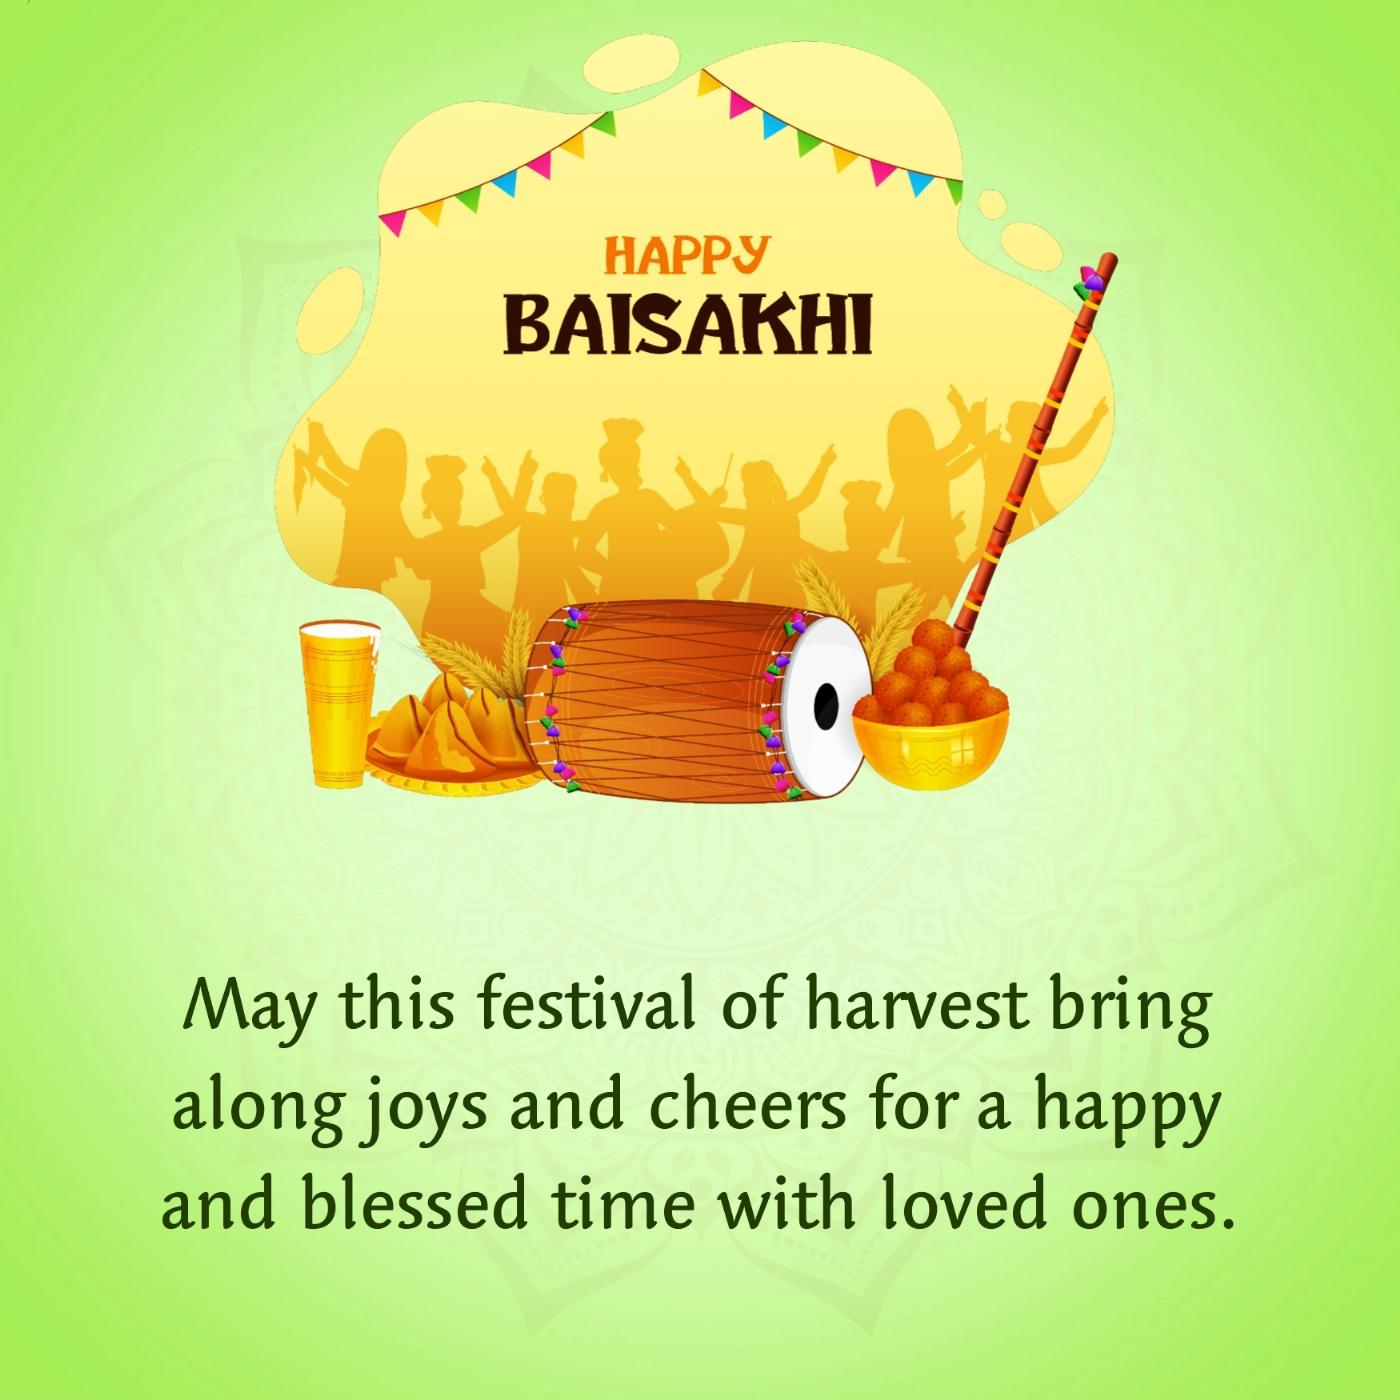 May this festival of harvest bring along joys and cheers